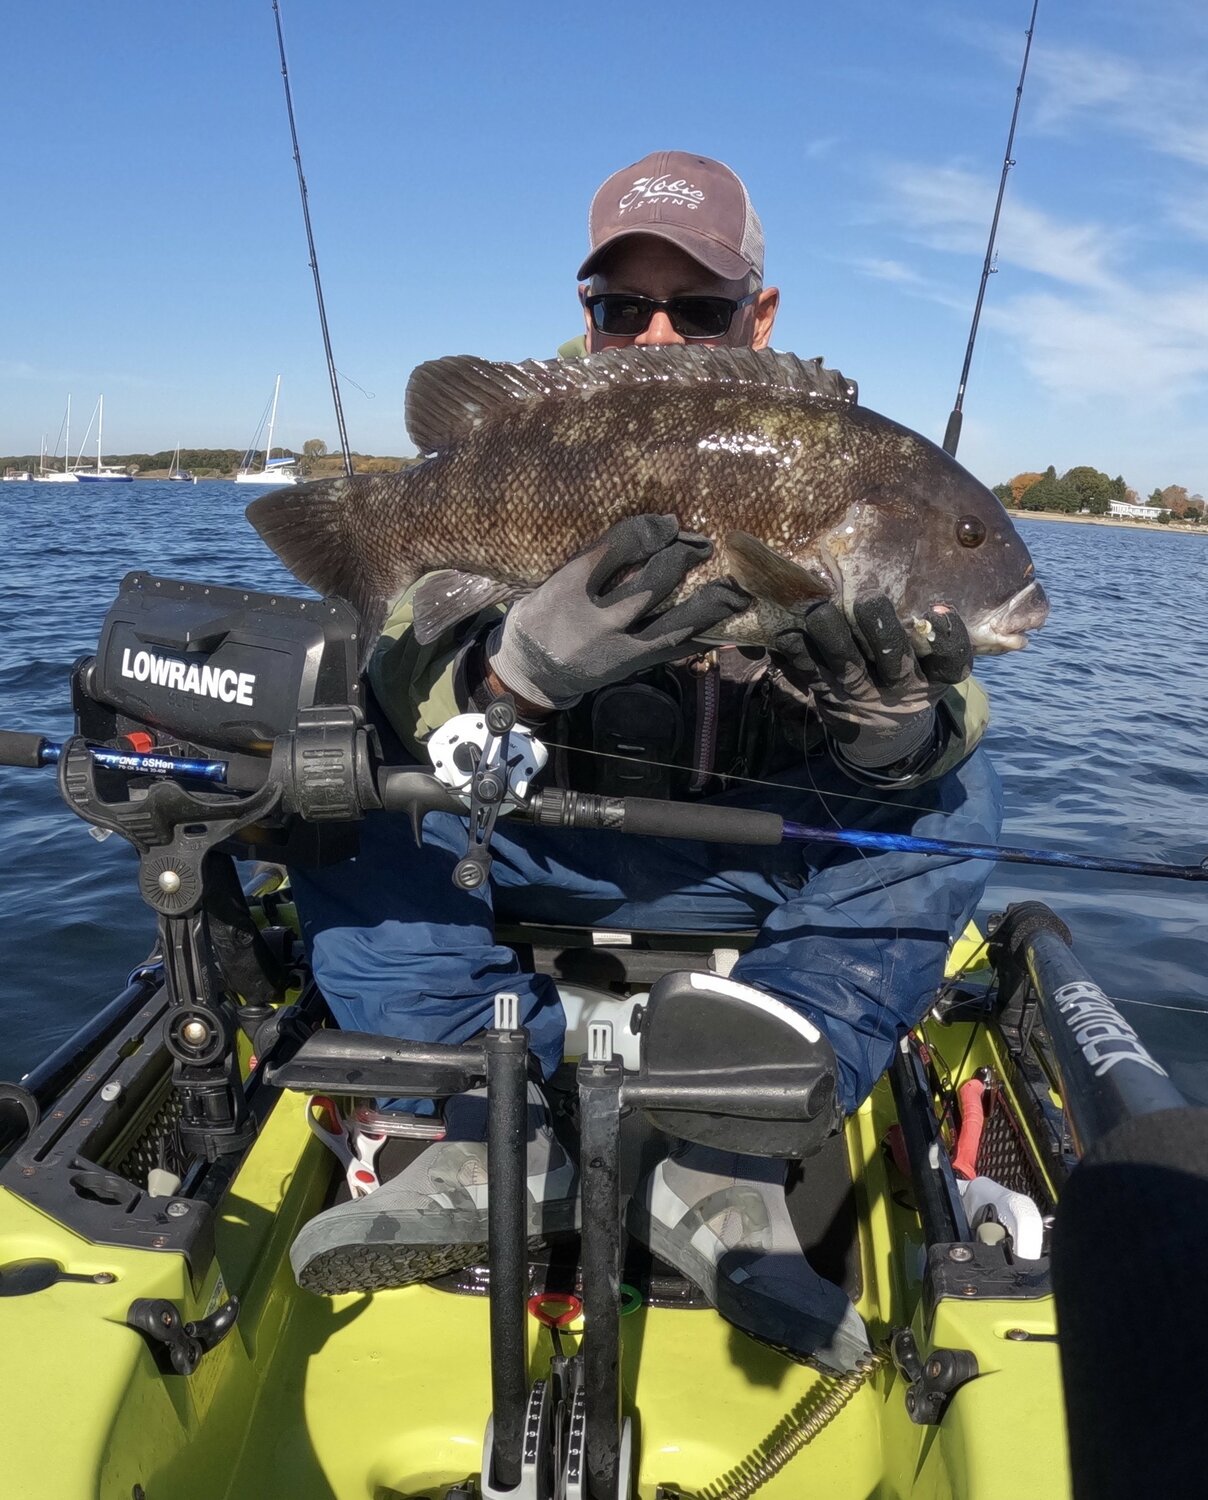 Kayak angler Tom Houde said, “Caught a stringer of keeper tog last week in the West Bay, including this 21” female which was released after a quick photo. Water temp 60 degrees, depth 20 feet.”